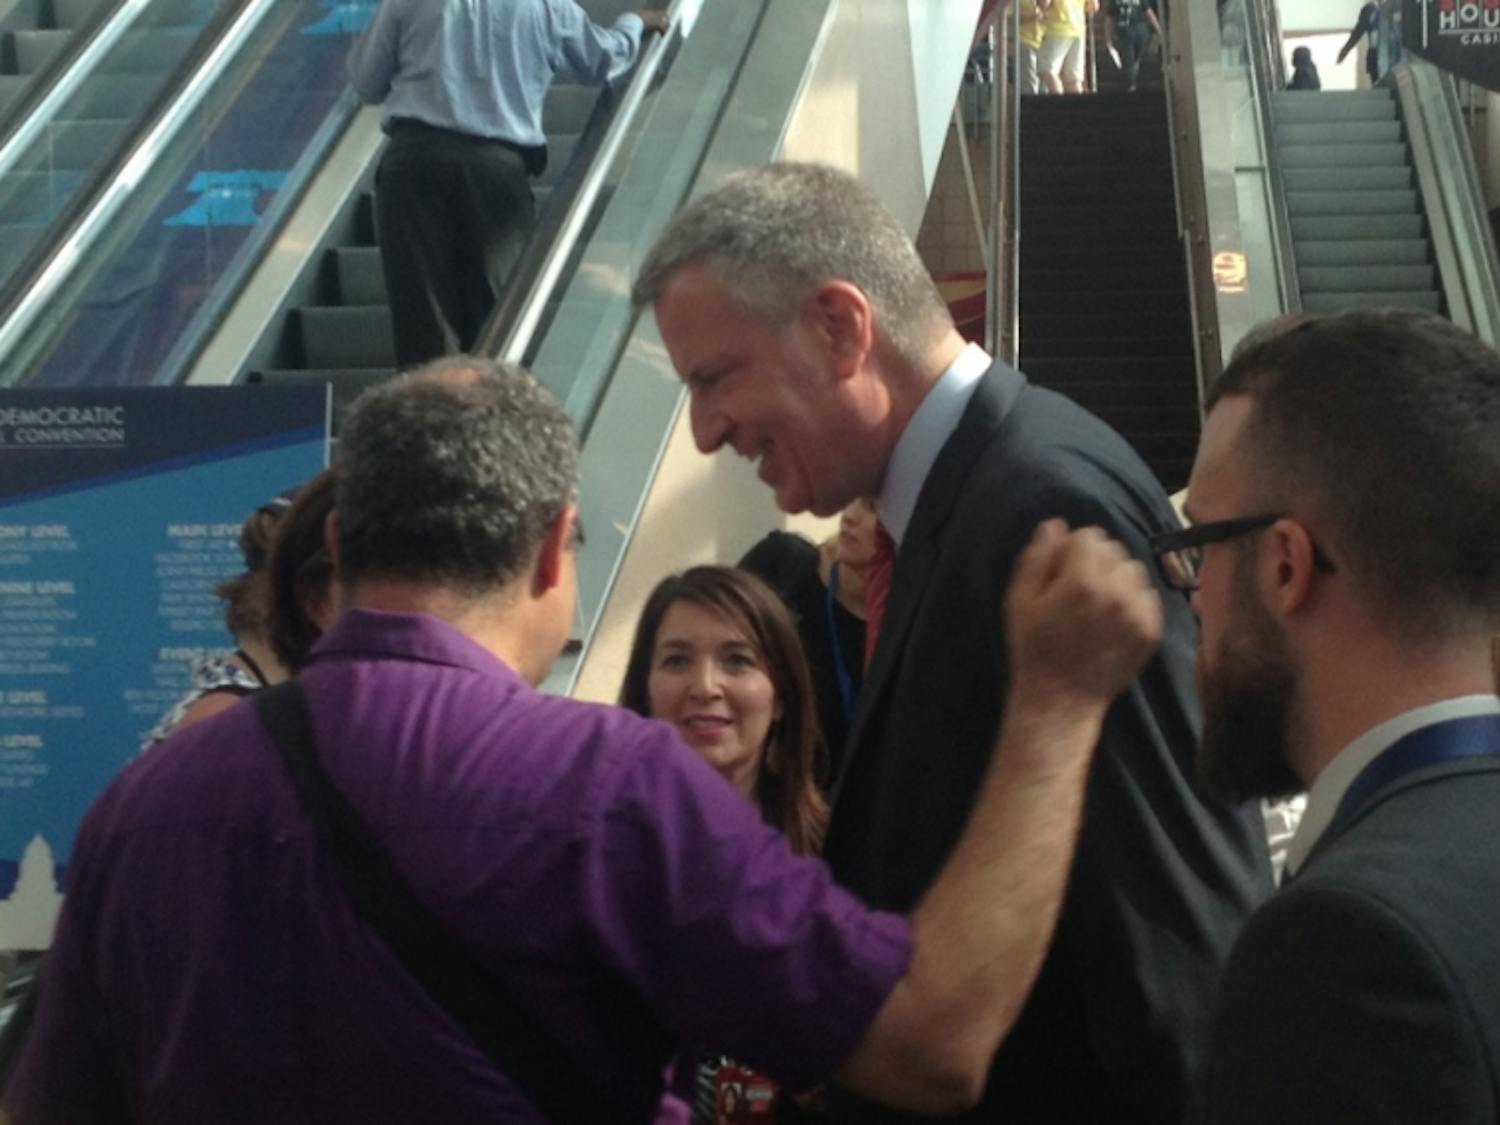 New York Mayor Bill de Blasio greets delegates on the first day of the Democratic National Convention in Philadelphia on July 25, 2016.